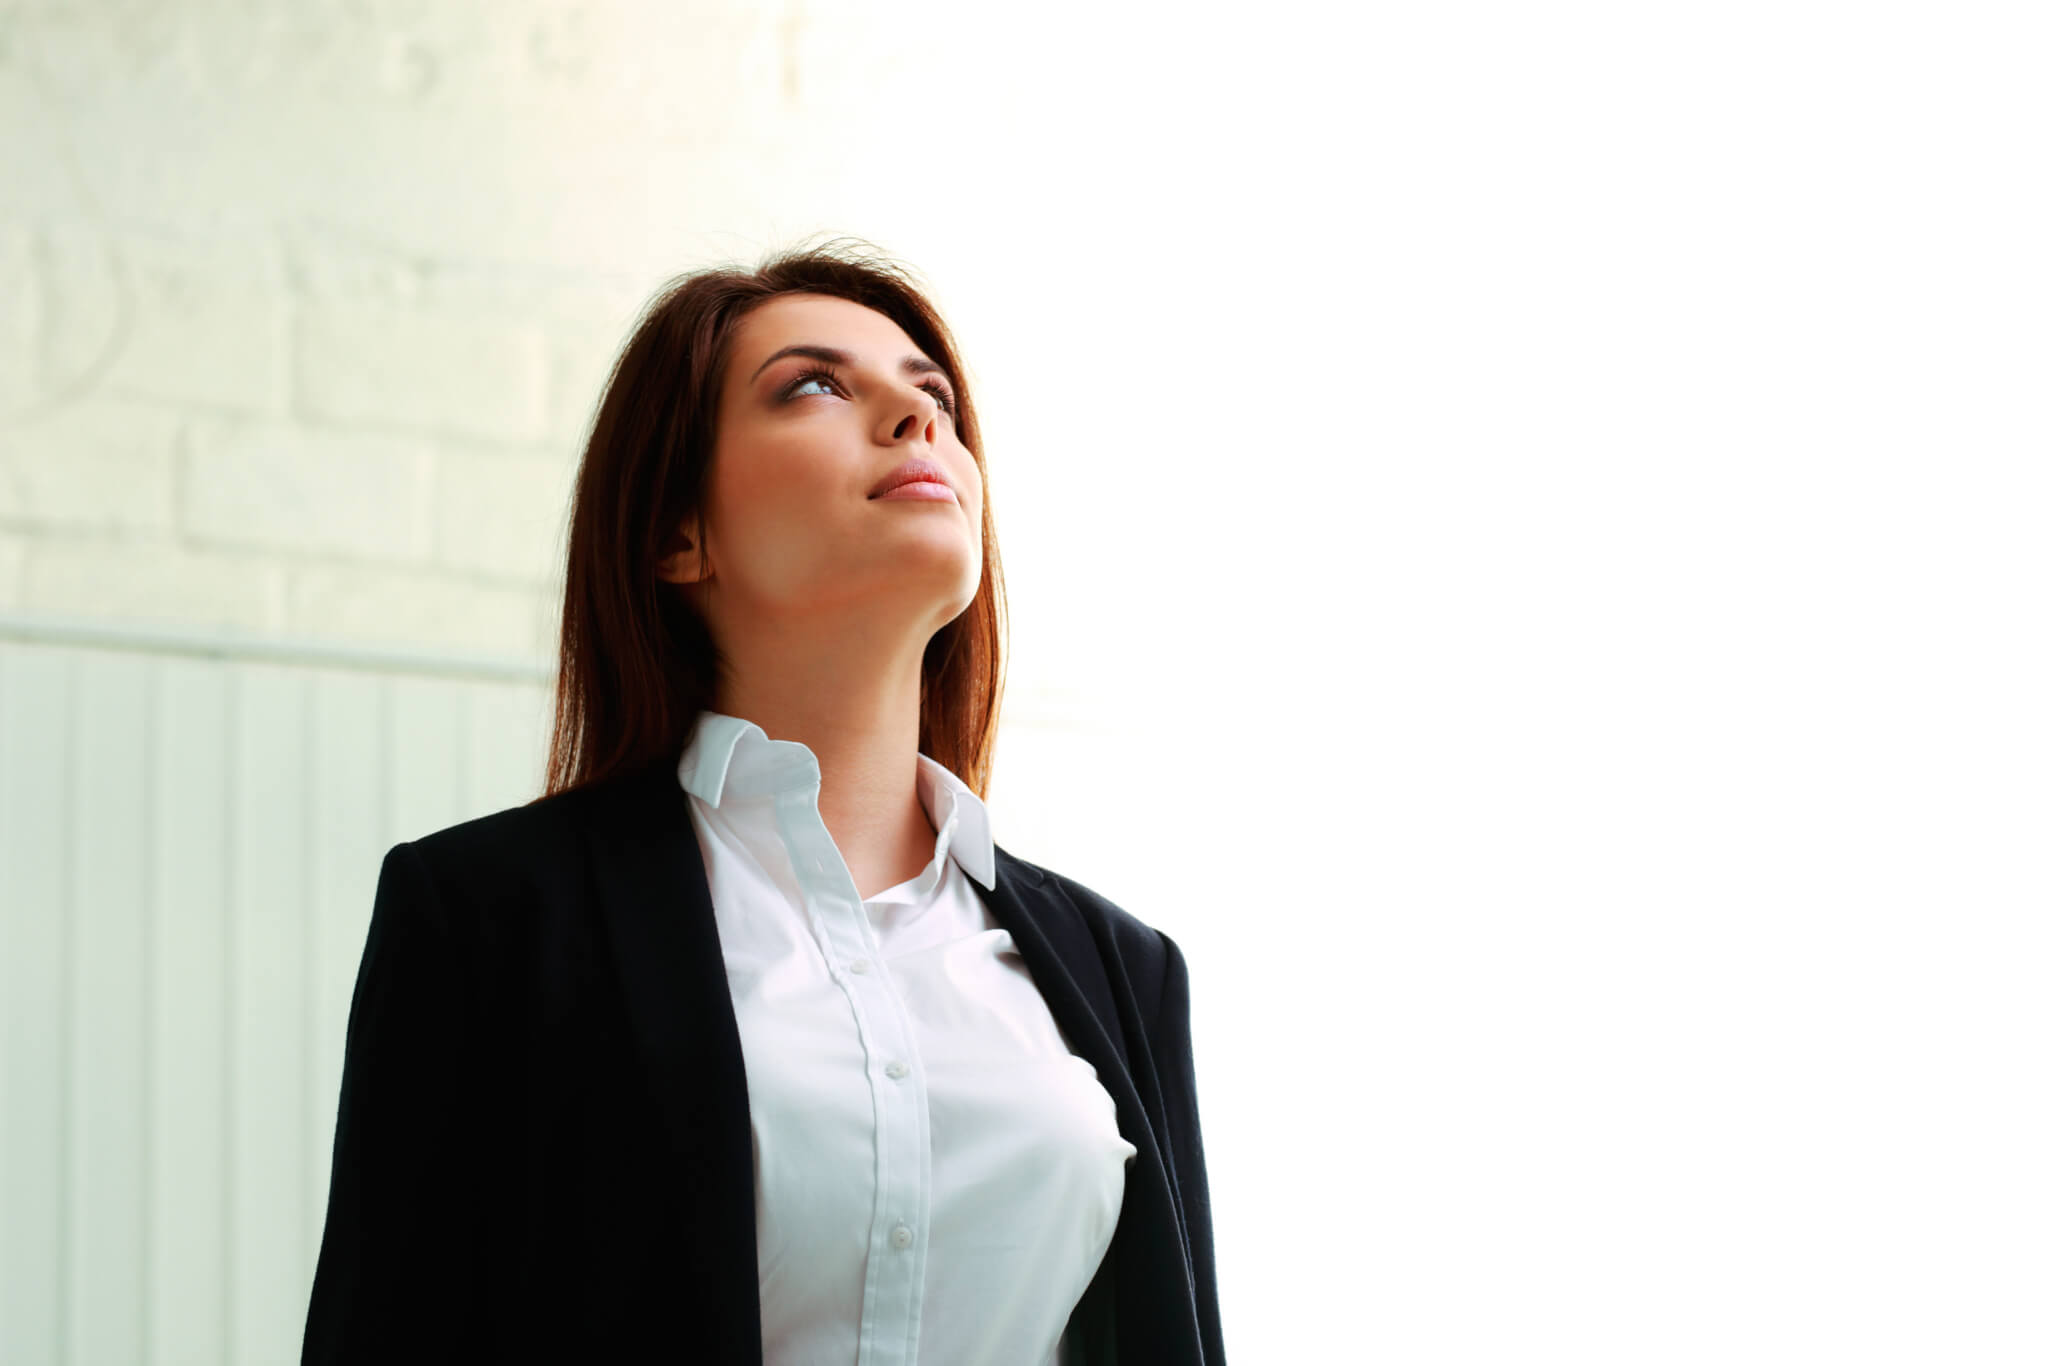 Business woman looking up at glass ceiling in office